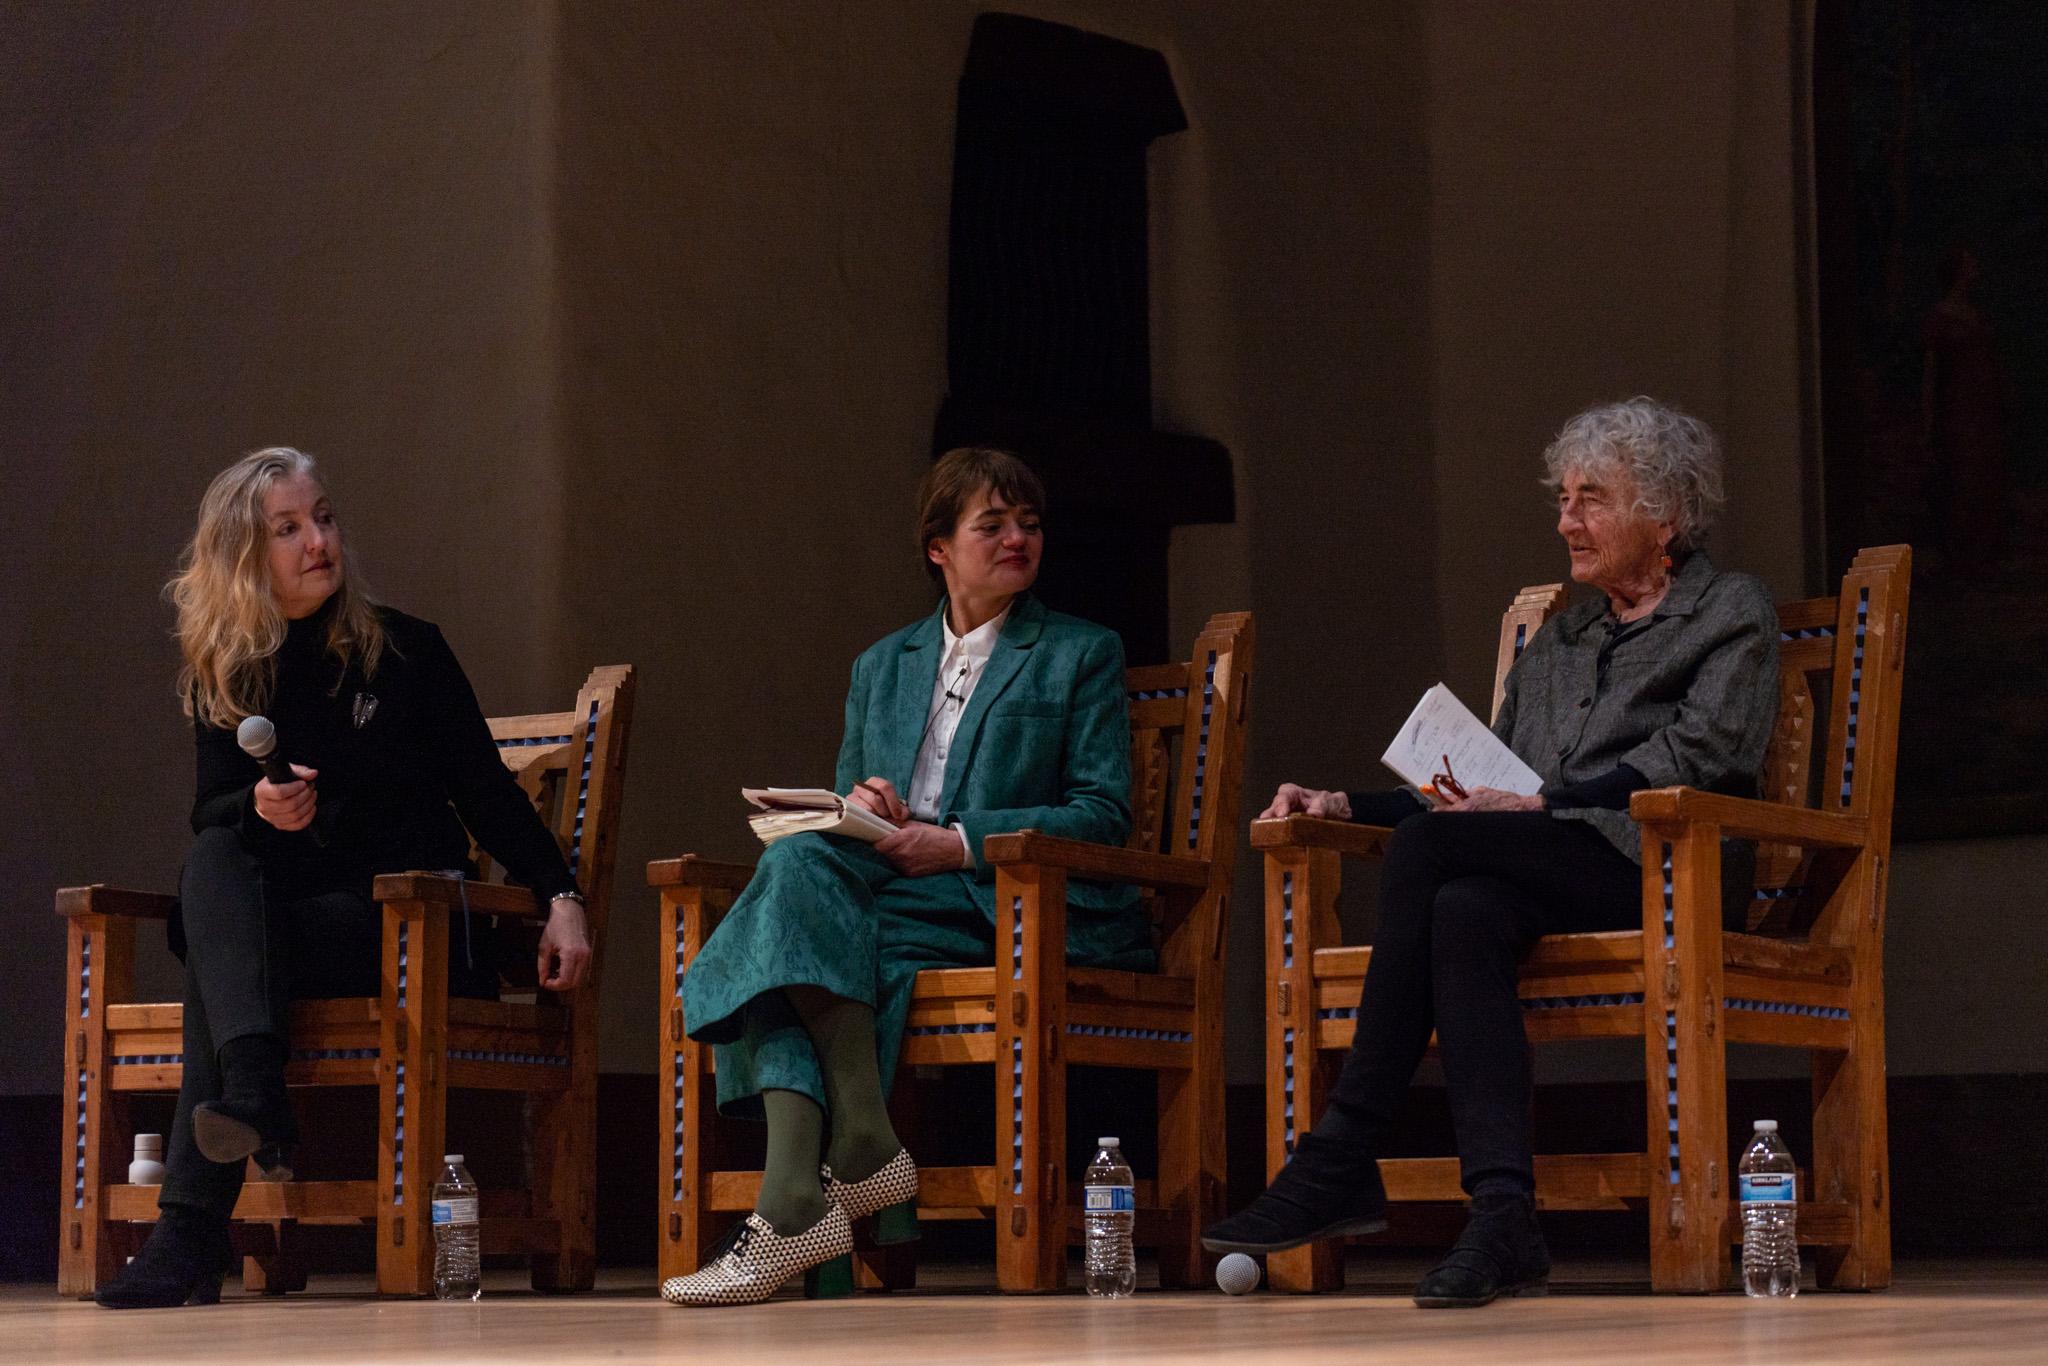 Rebecca Solnit, Lisa Le Feuvre, and Lucy Lippard in conversation at the 2023 Holt/Smithson Foundation Annual Lecture at the New Mexico Museum of Art